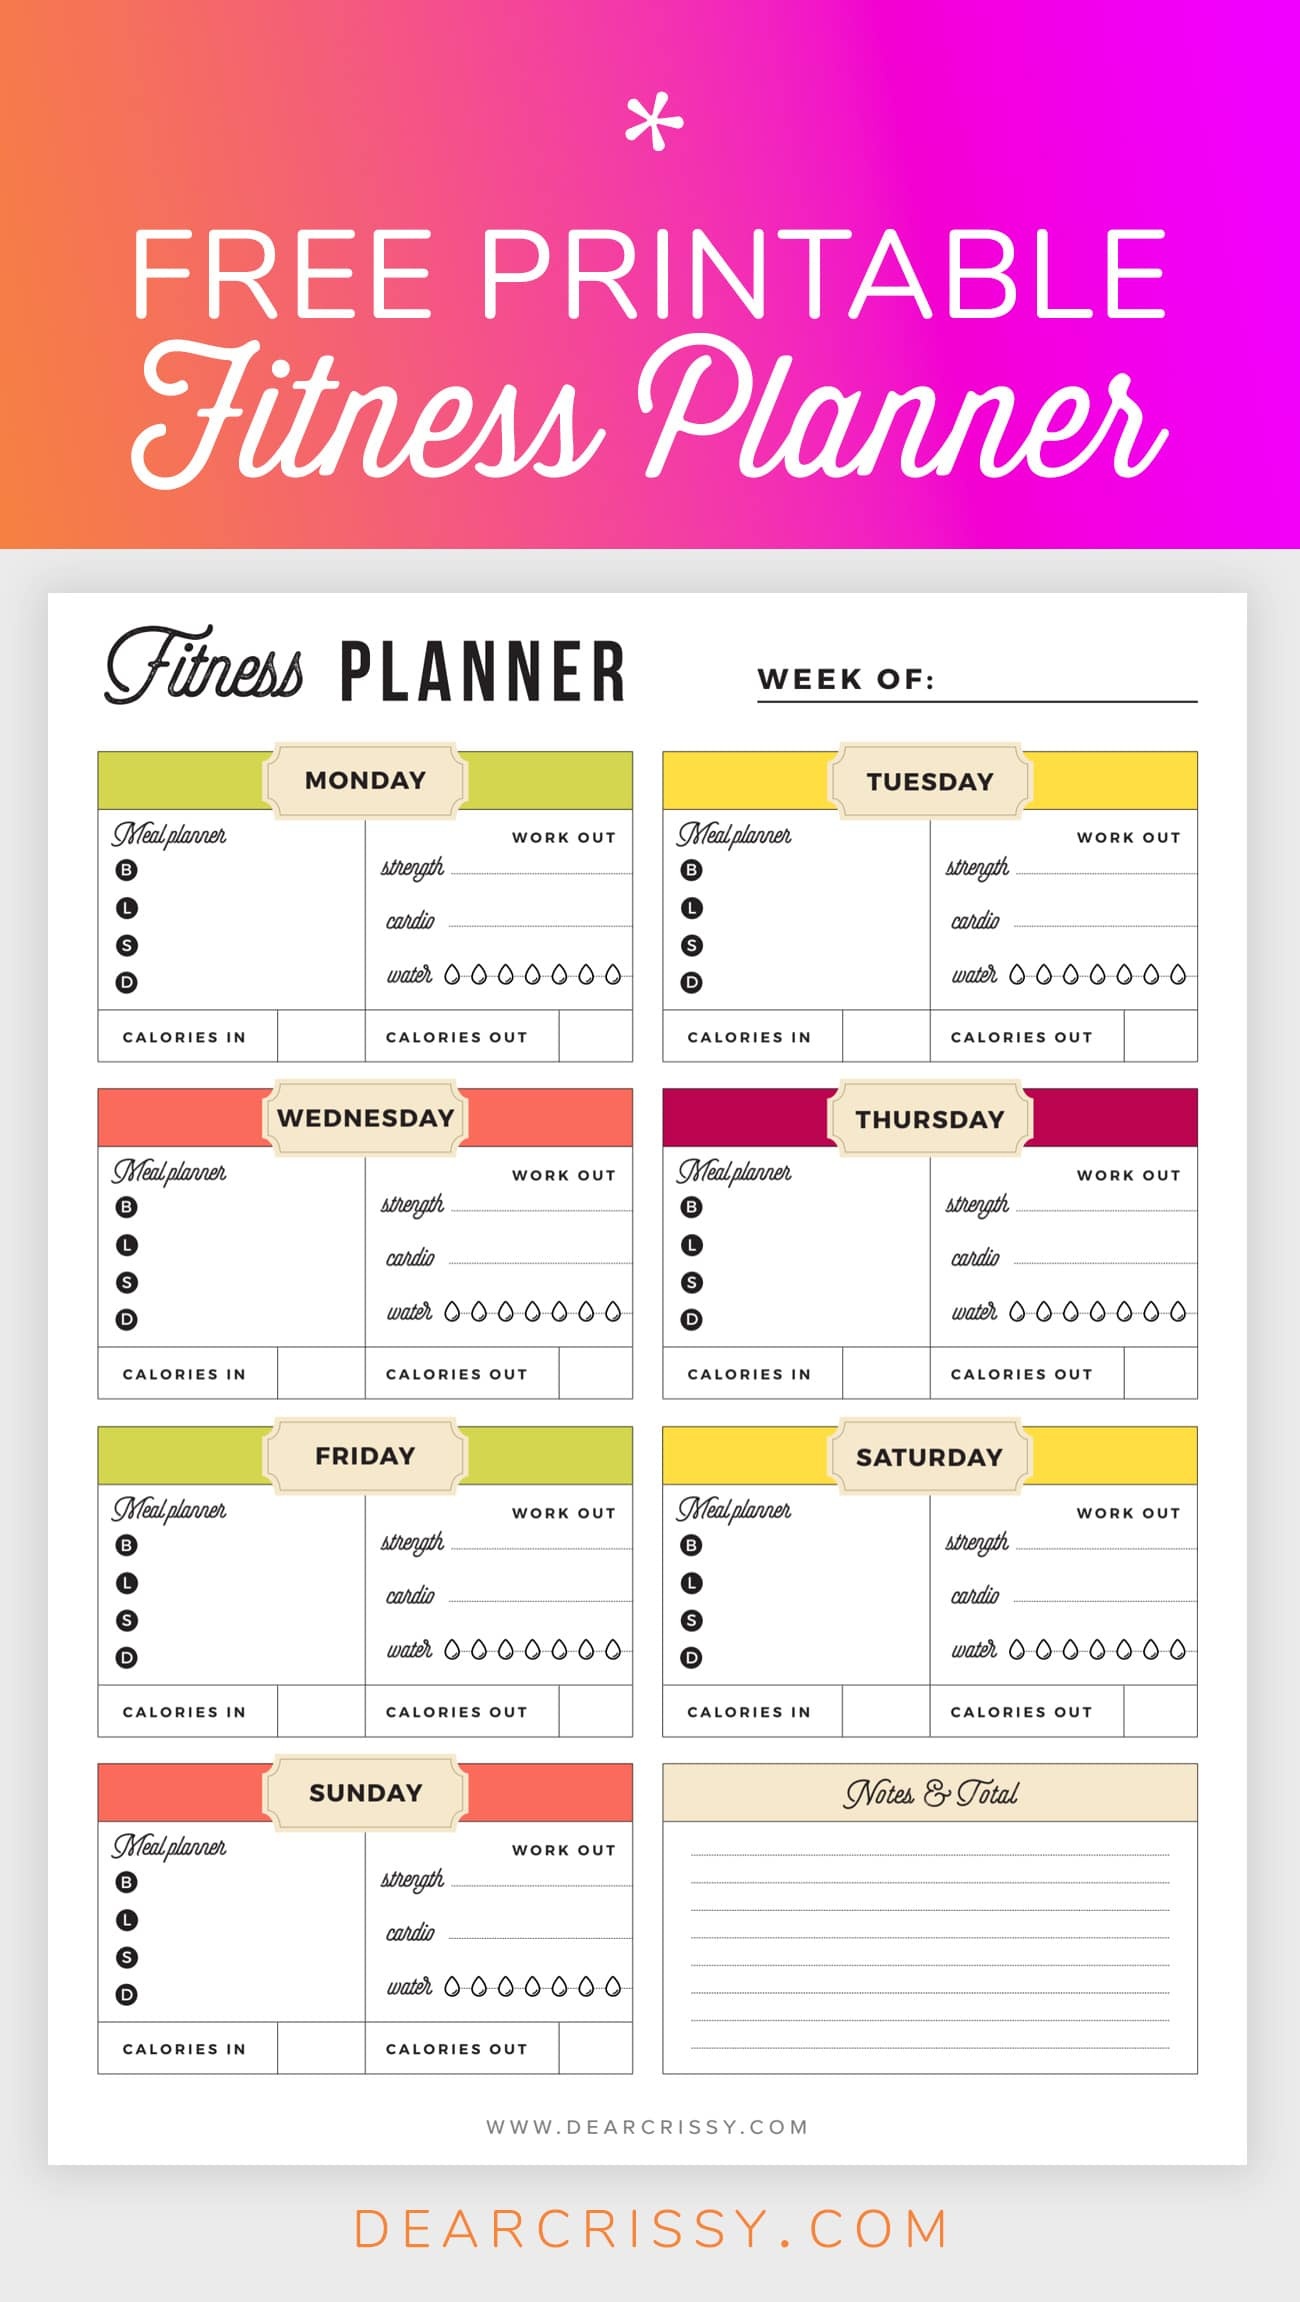 Free Printable Fitness Planner - Meal And Fitness Tracker, Start Today! - Free Printable Fitness Tracker